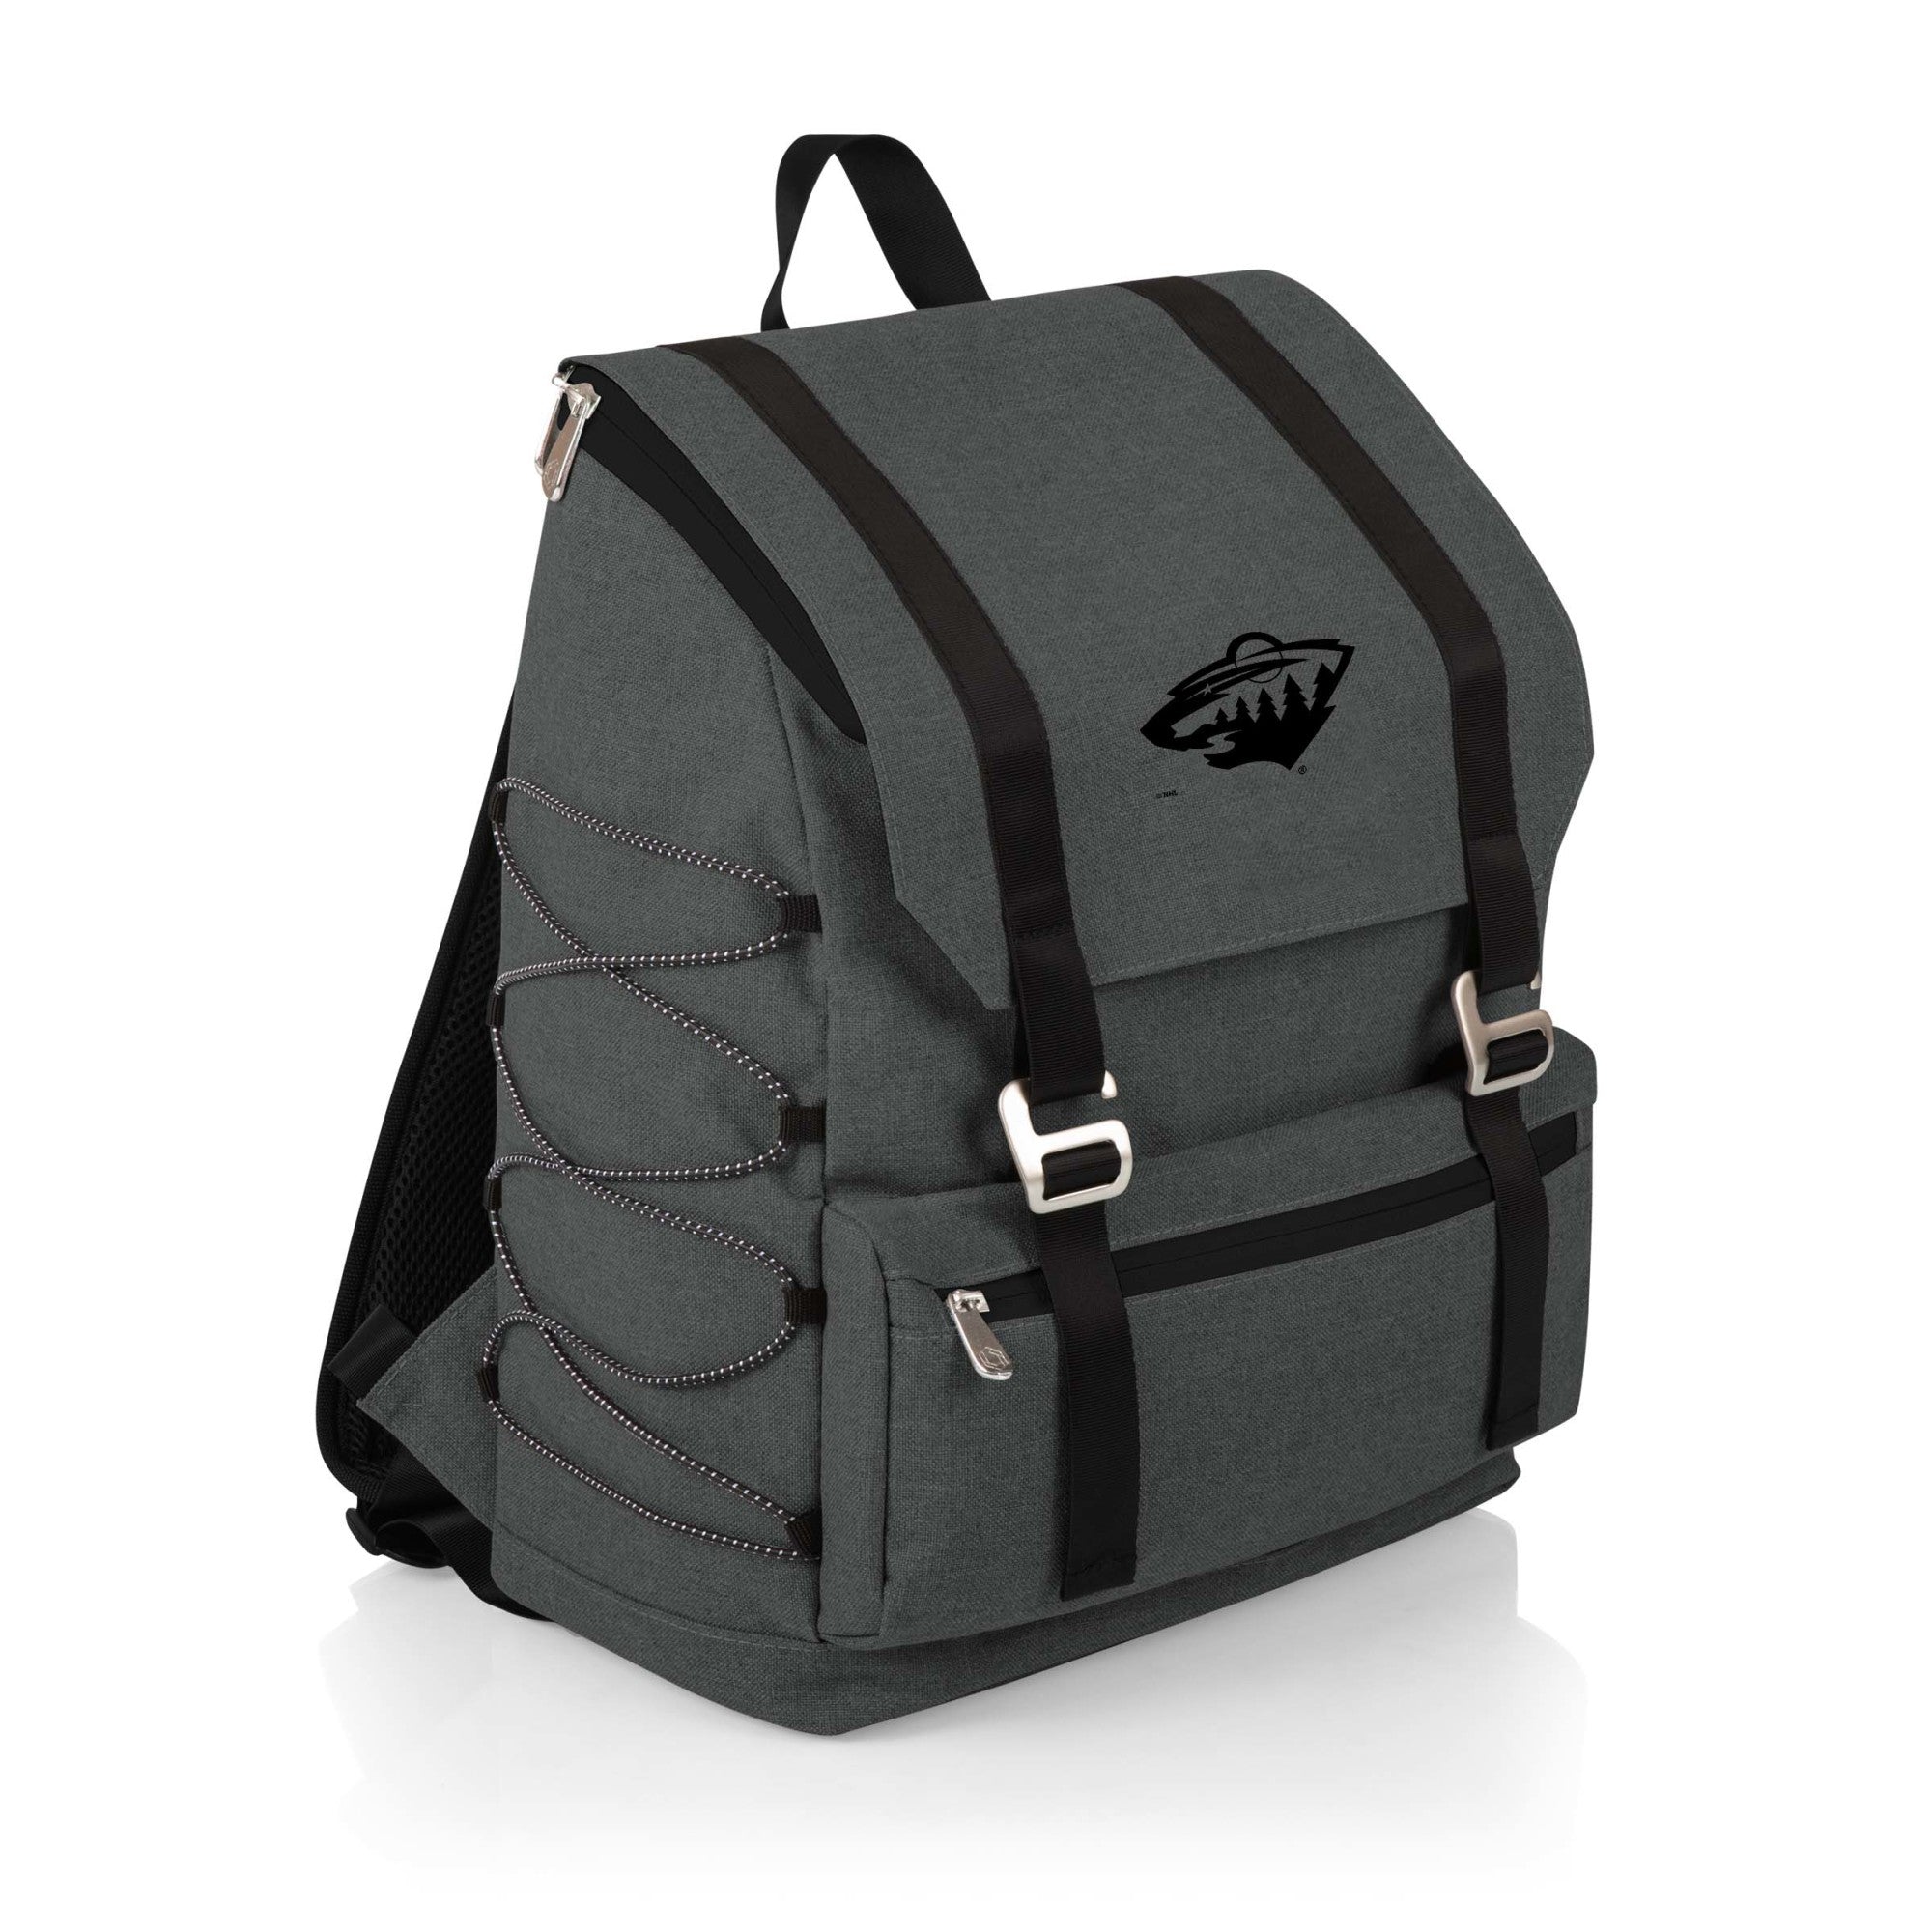 Minnesota Wild - On The Go Traverse Backpack Cooler